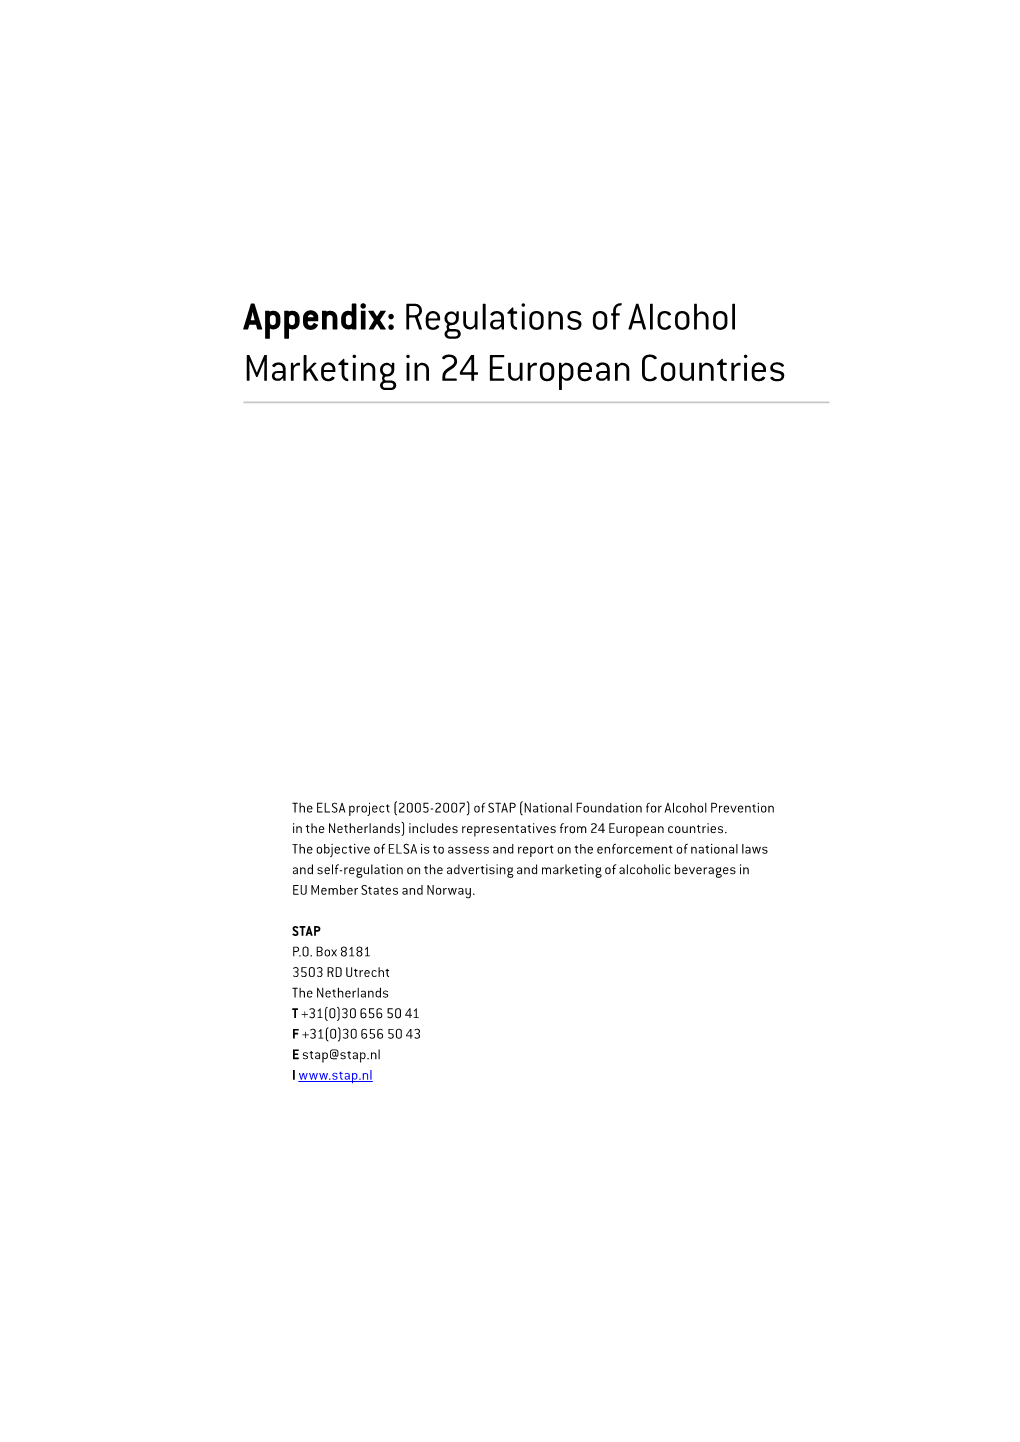 Regulations of Alcohol Marketing in 24 European Countries